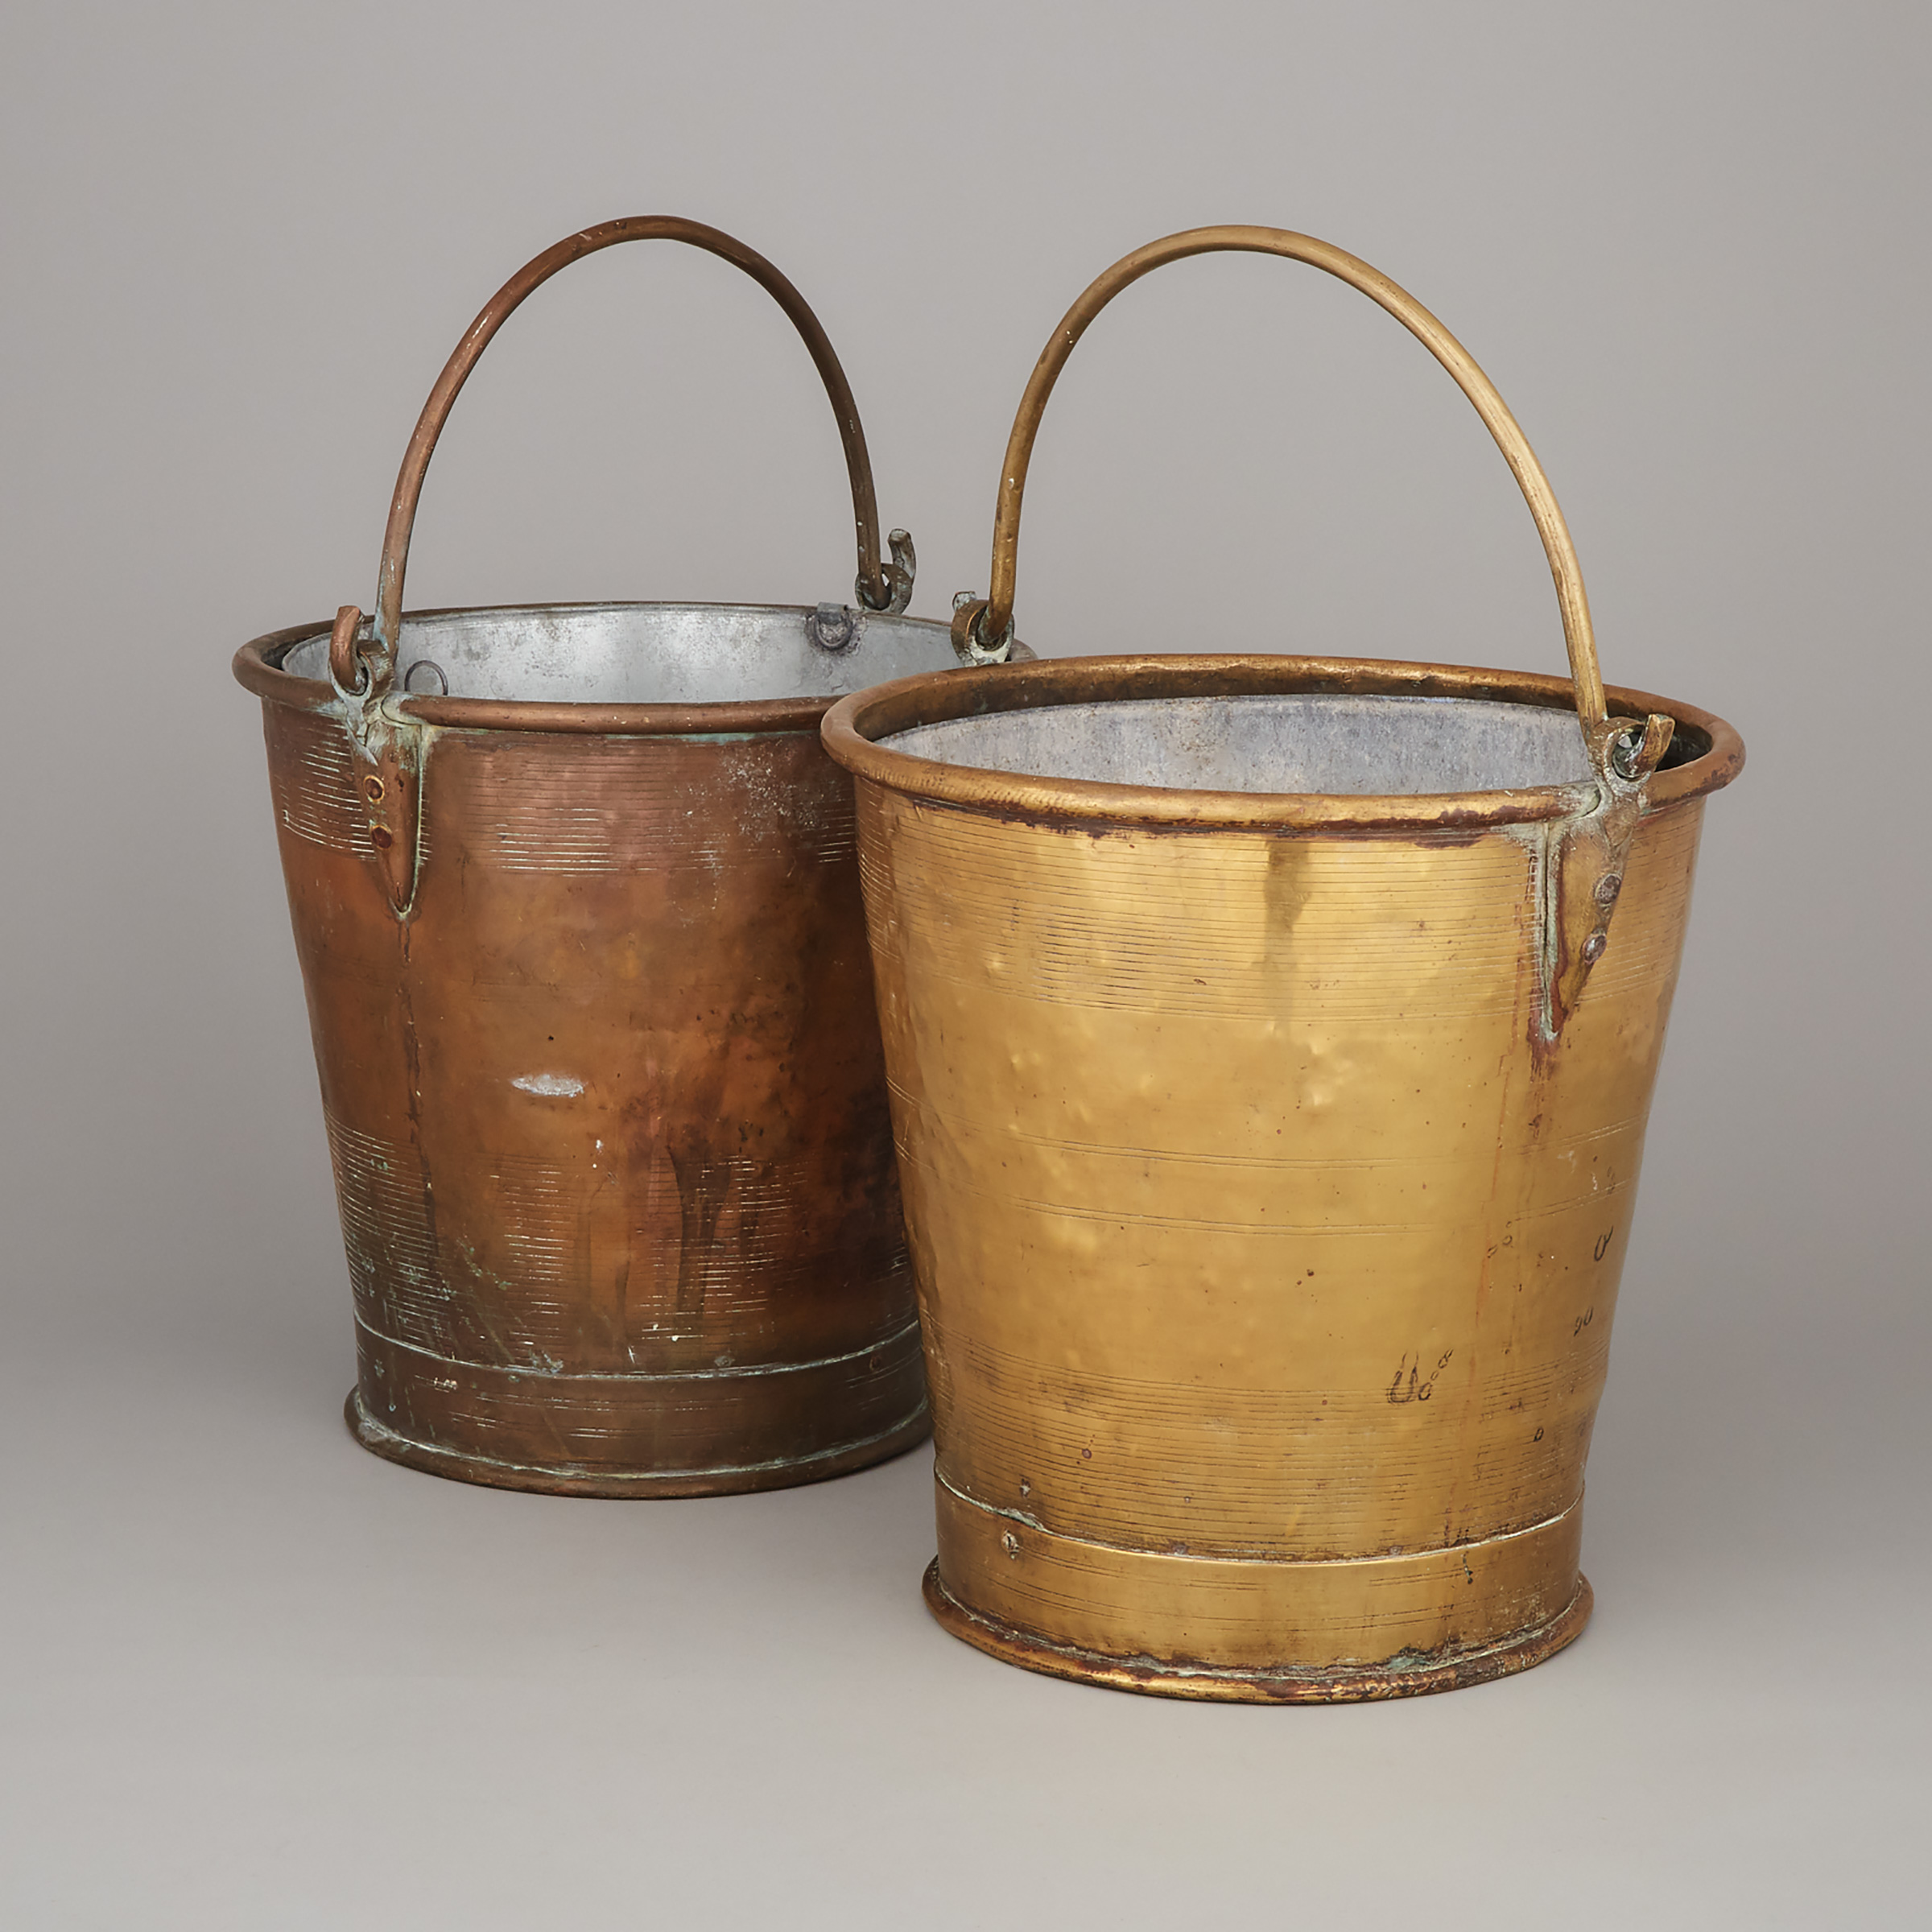 Pair of George IV Brass Buckets, early 19th century